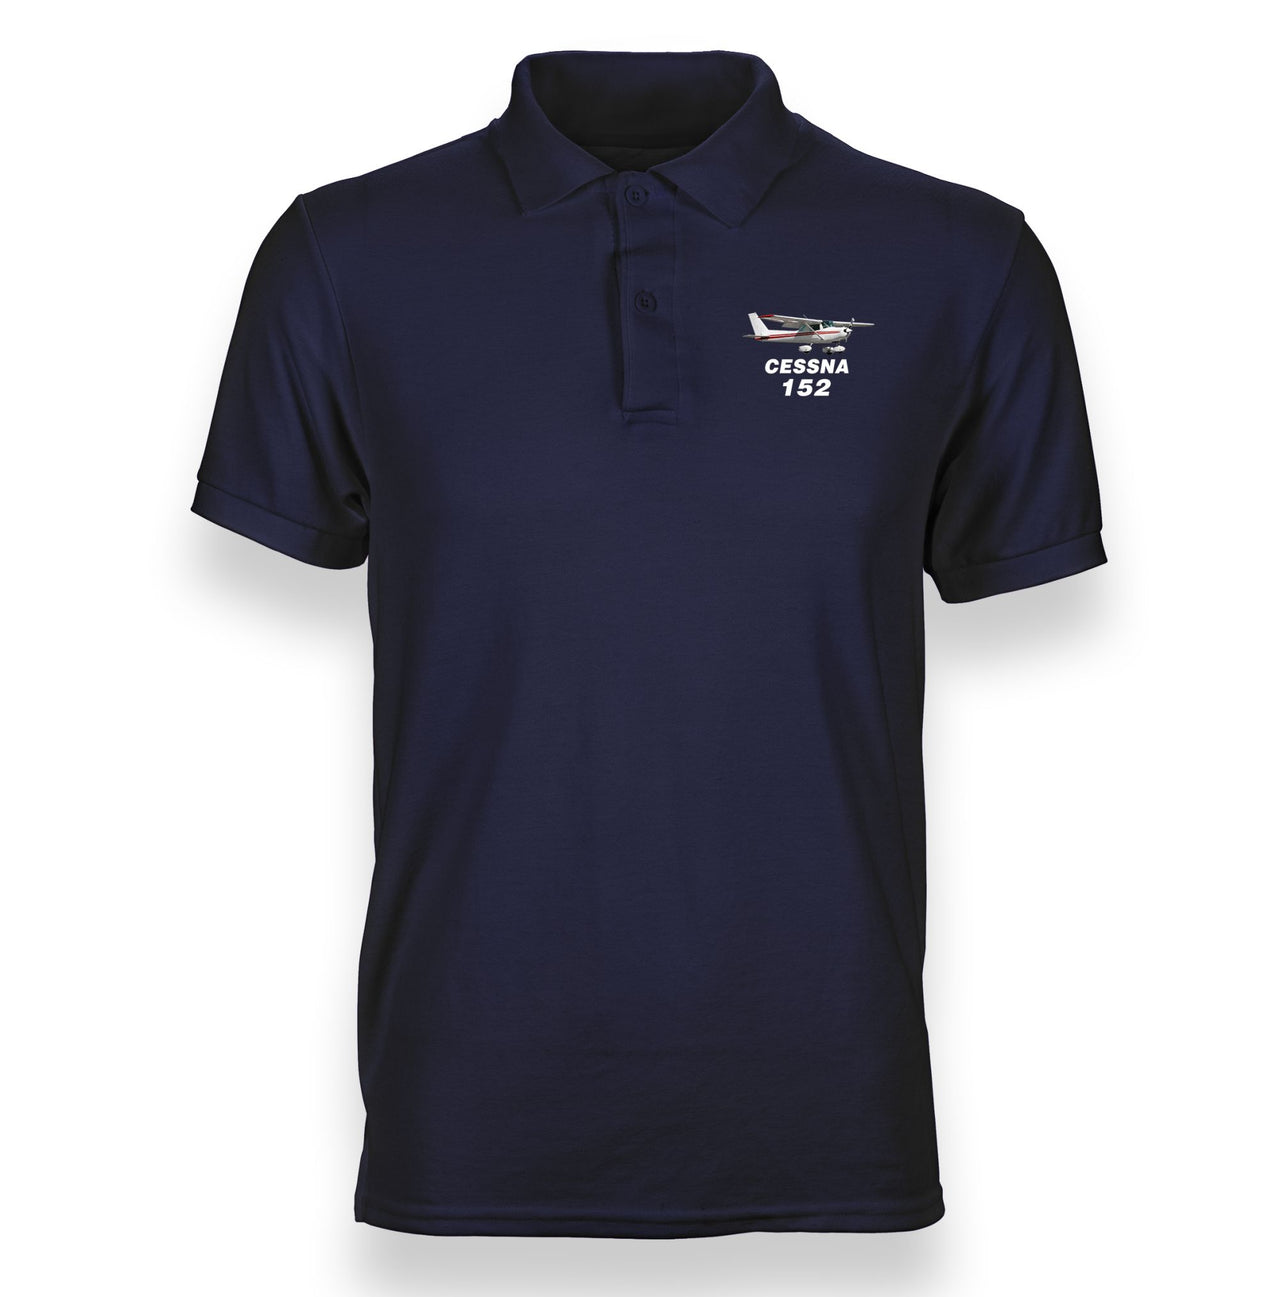 The Cessna 152 Designed "WOMEN" Polo T-Shirts